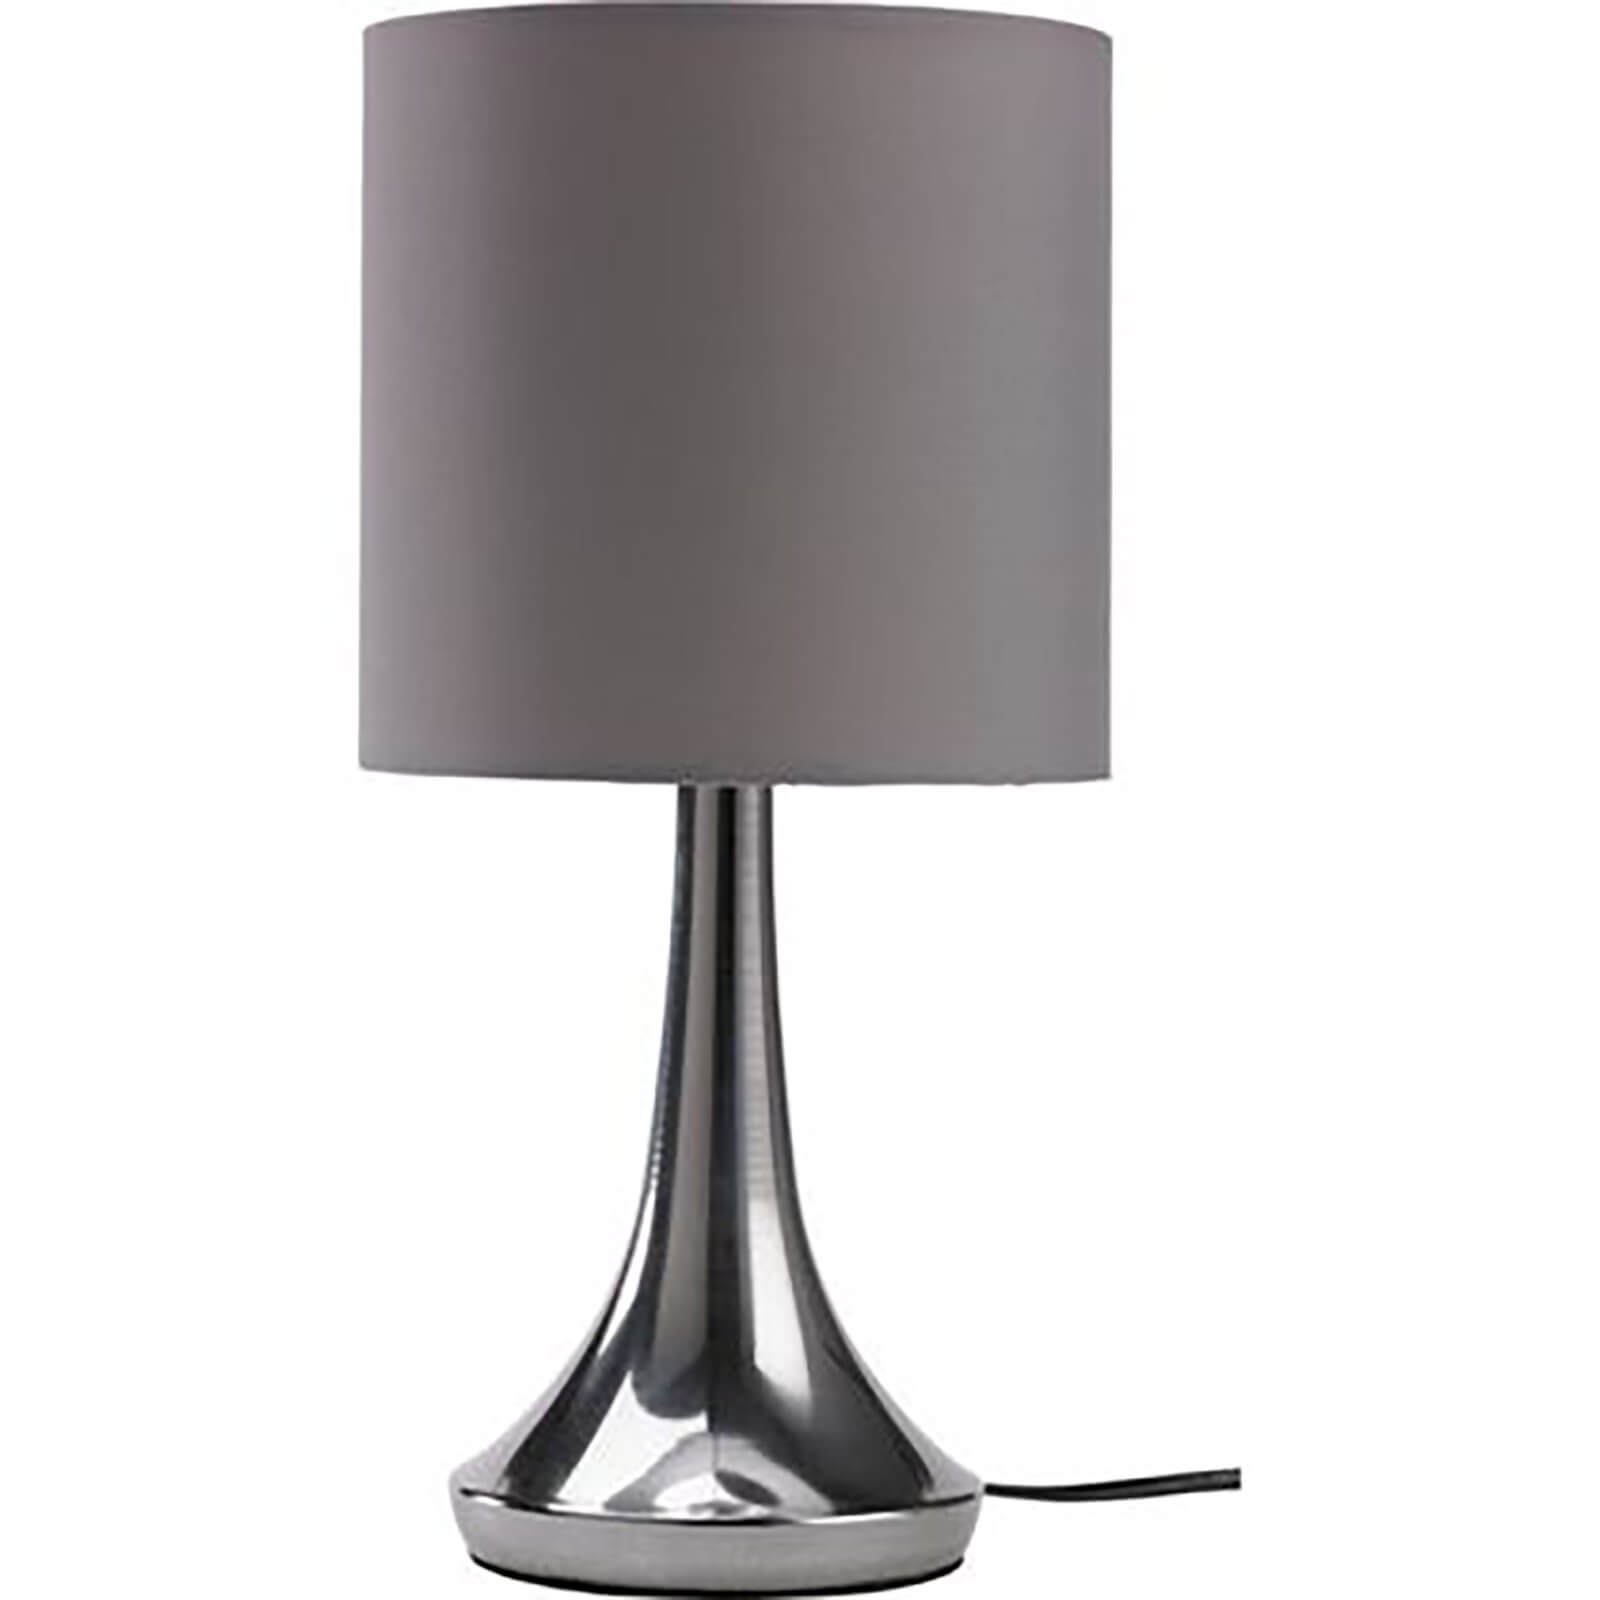 Touch Table Lamp - Charcoal